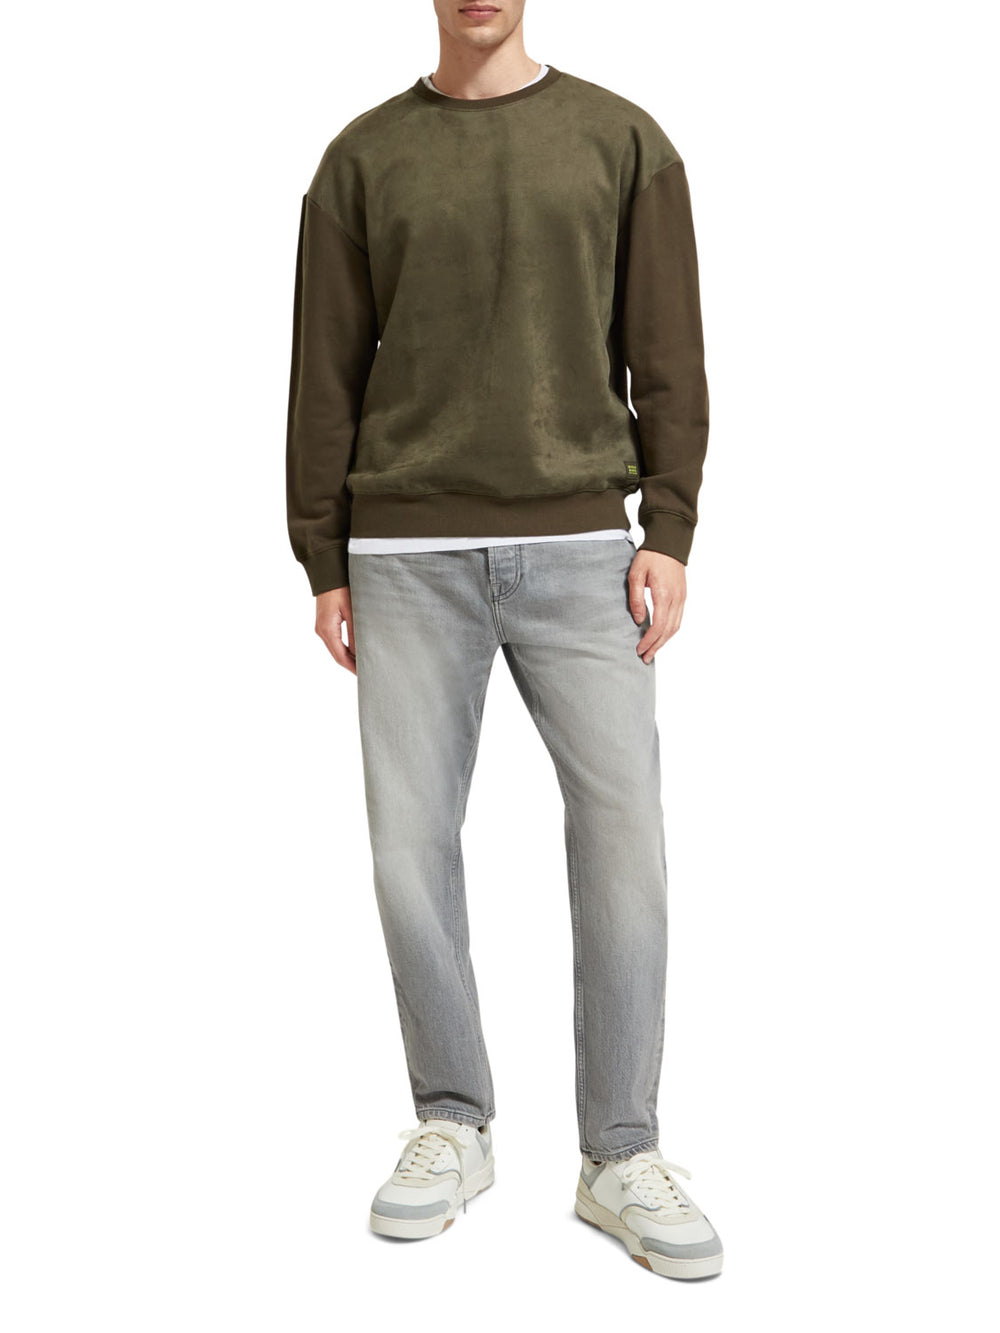 Relaxed Fit Faux Suede Felpa Sweatshirt in Army | Buster McGee